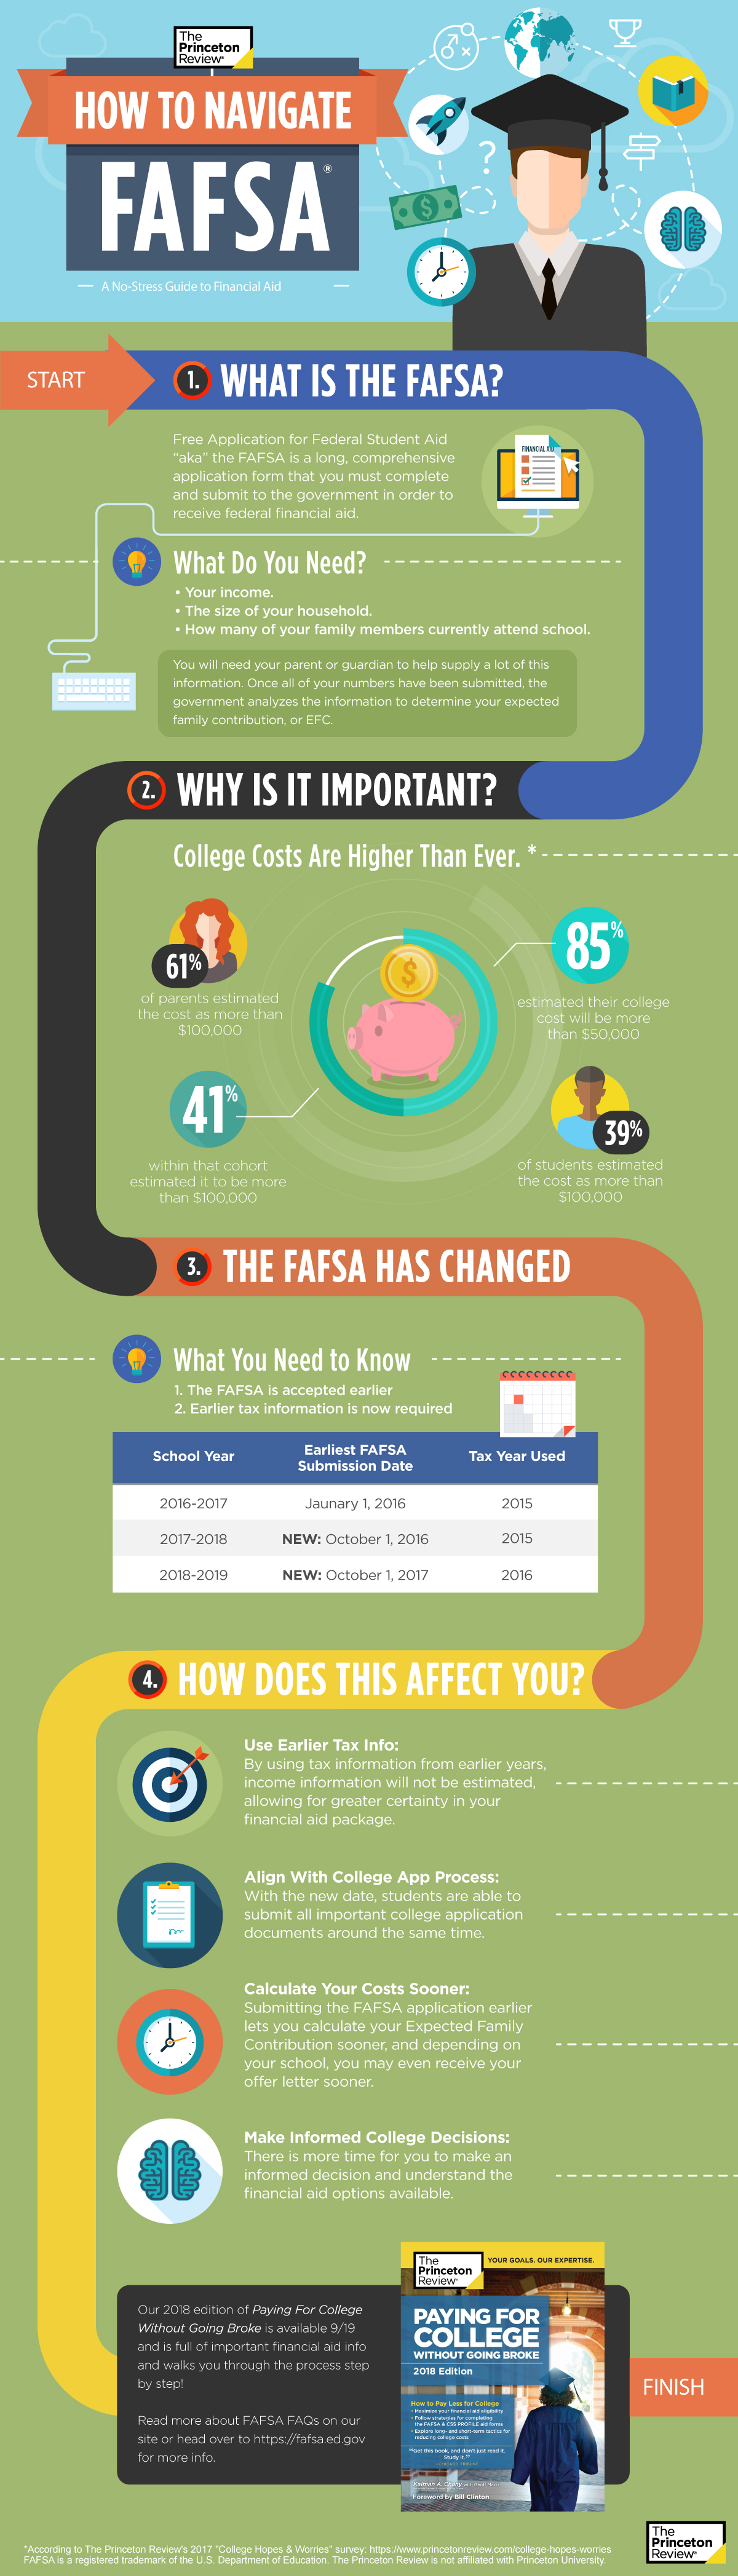 Navigate the FAFSA infographic